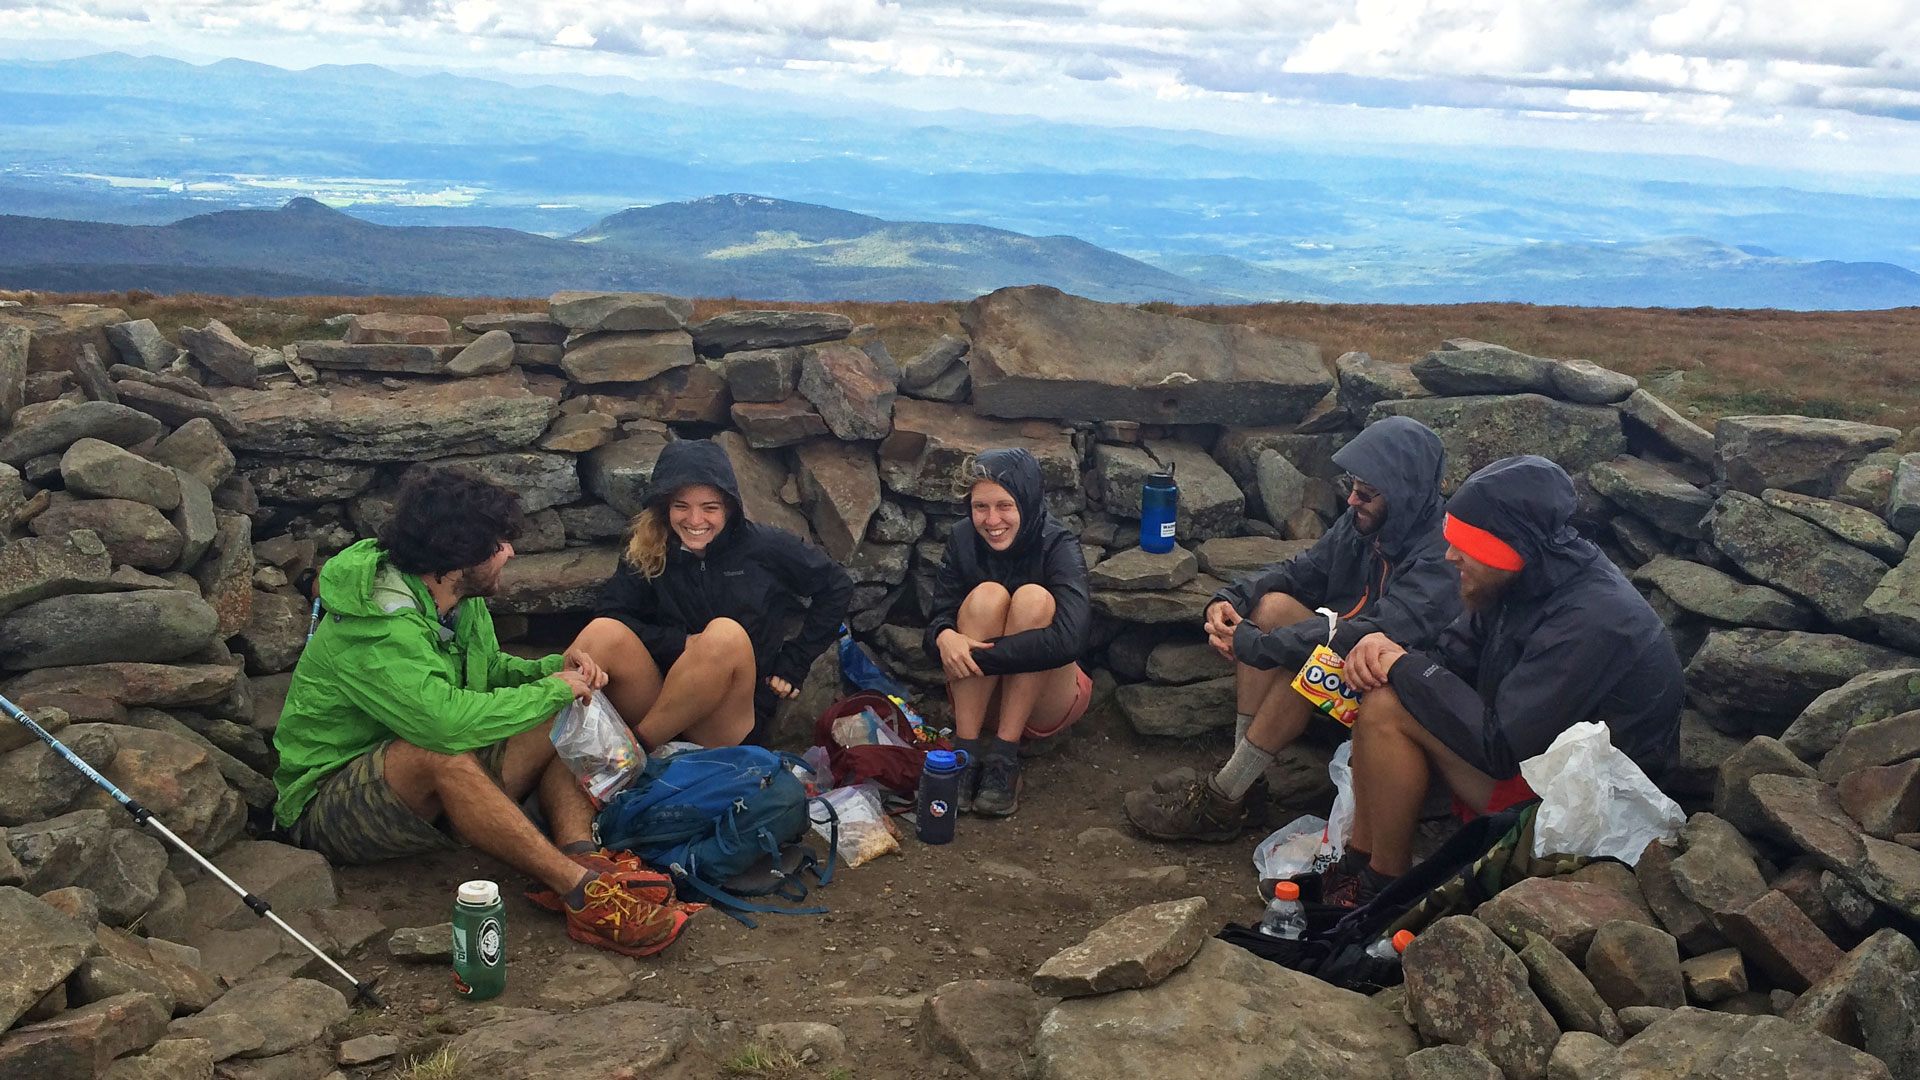 Snacking with friends on Mount Moosilauke, New Hampshire. Photo by Eric "Gumby" Wetherington